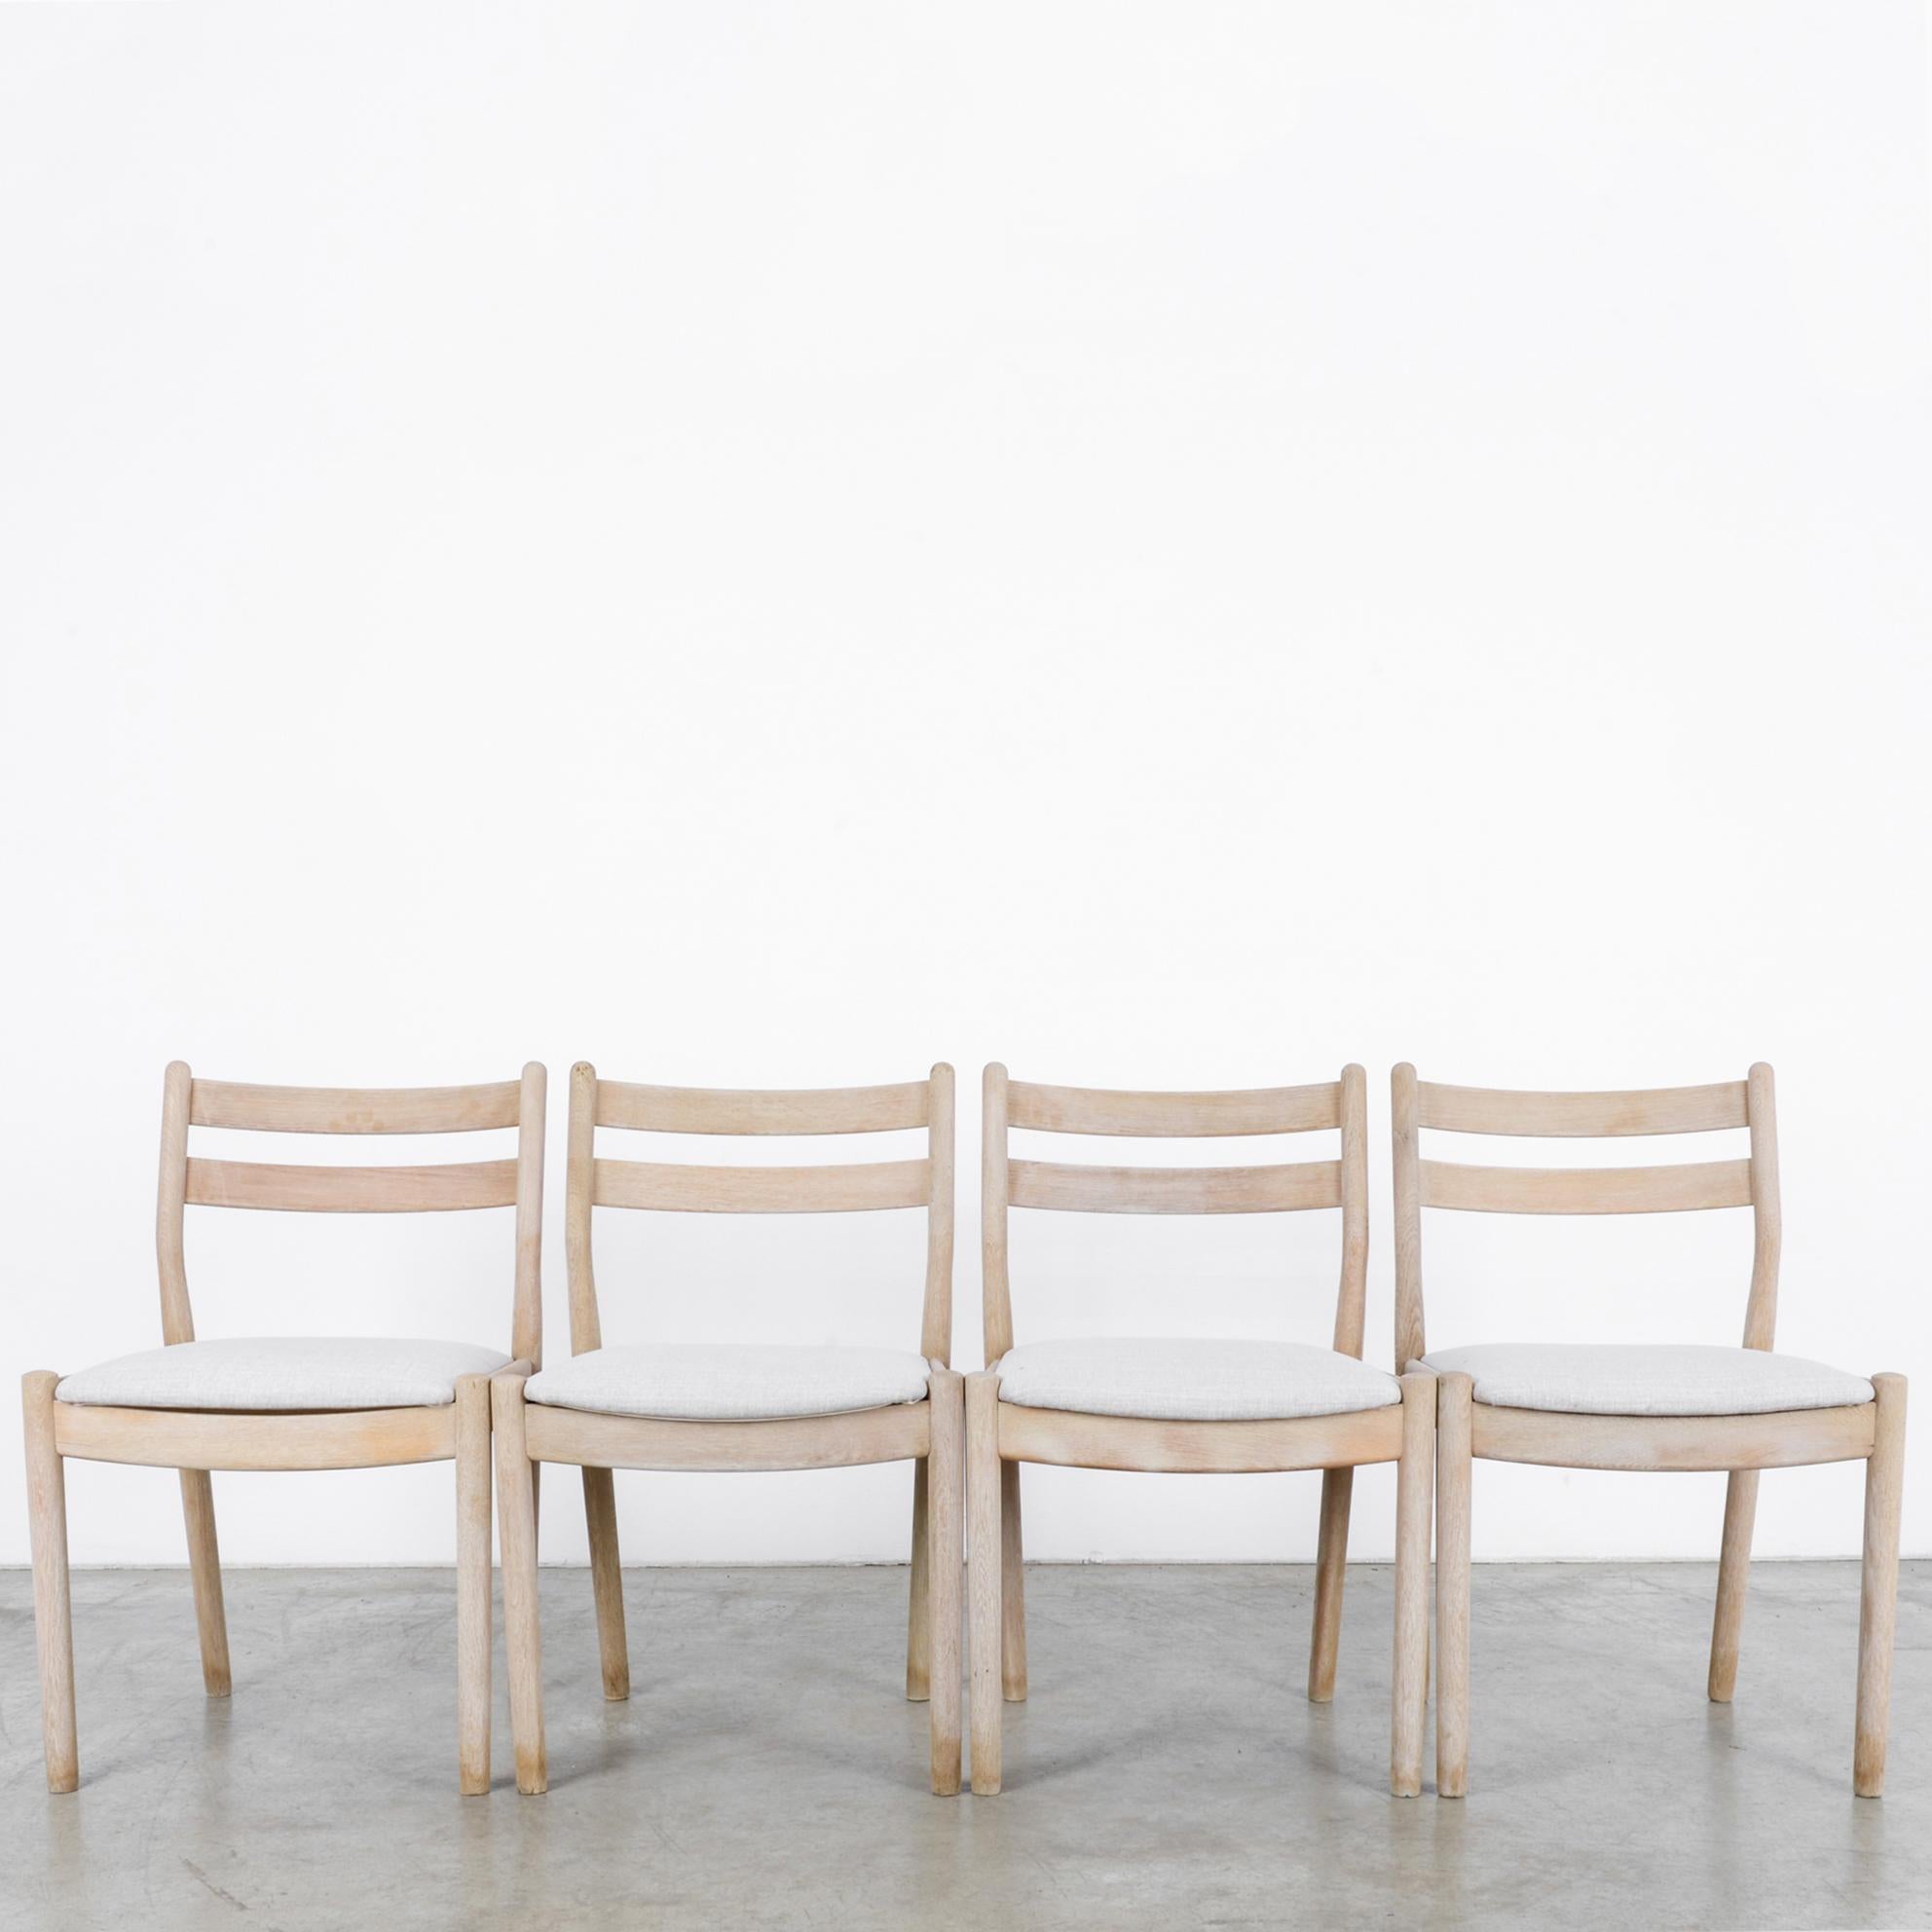 This set of four wooden chairs was made in France, circa 1960. Stone gray upholstered seats complement the pale tones and beautiful wood grain of the oak. The tilt of the backrests and the curves of the back rails and apron give these dining chairs